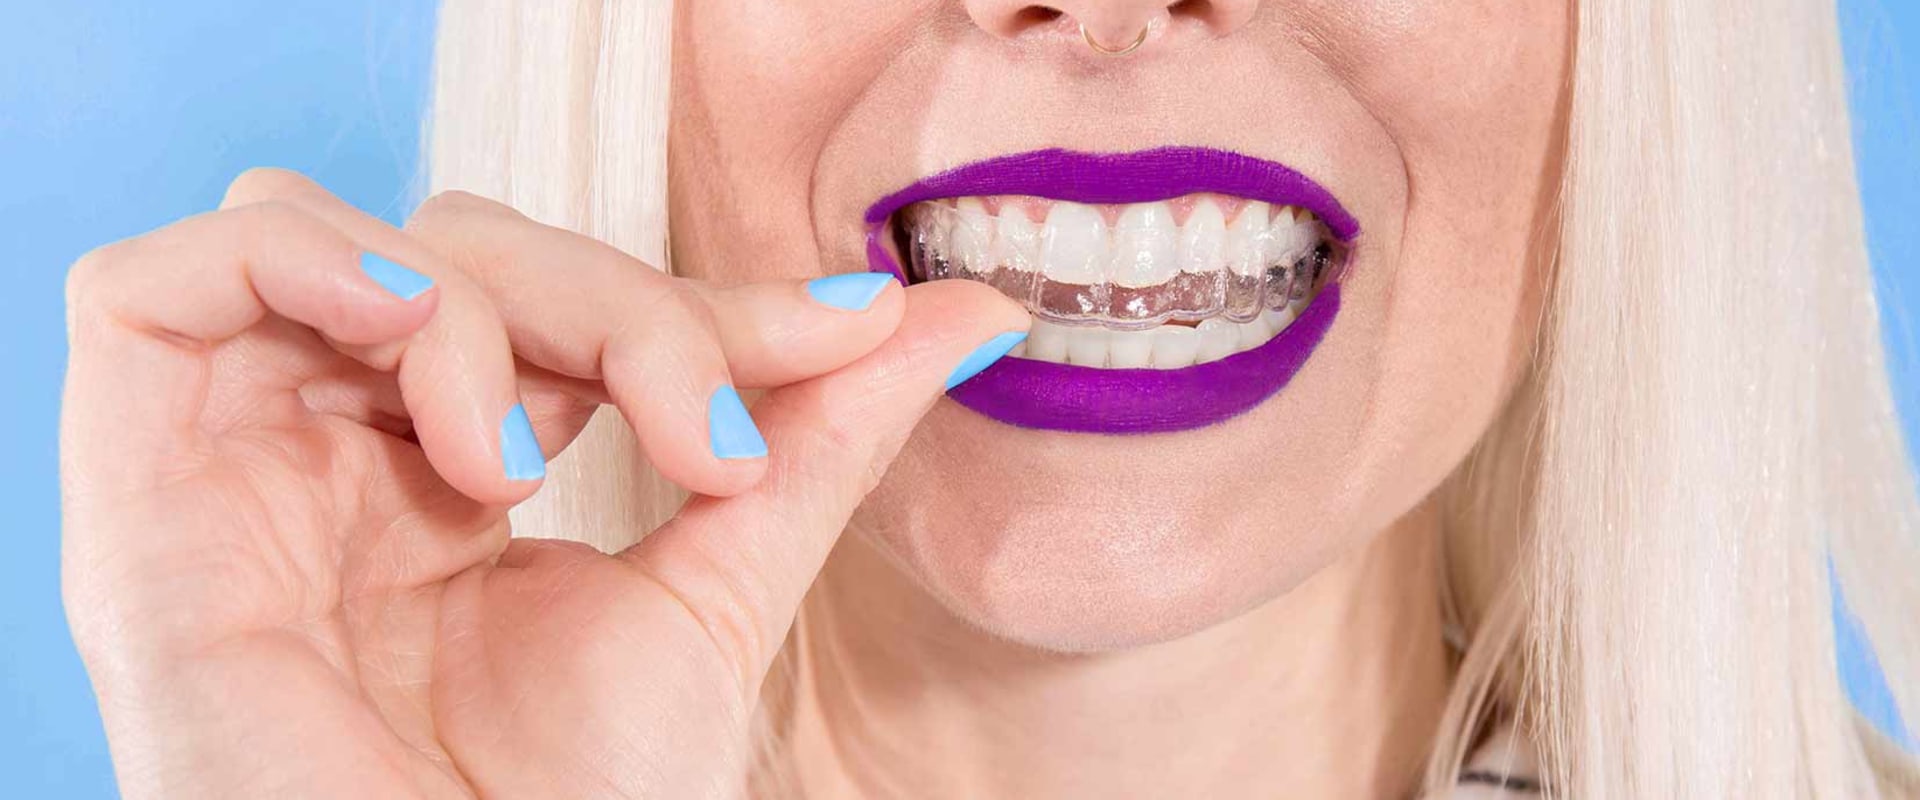 Who Owns Invisalign? Align Technology Explained